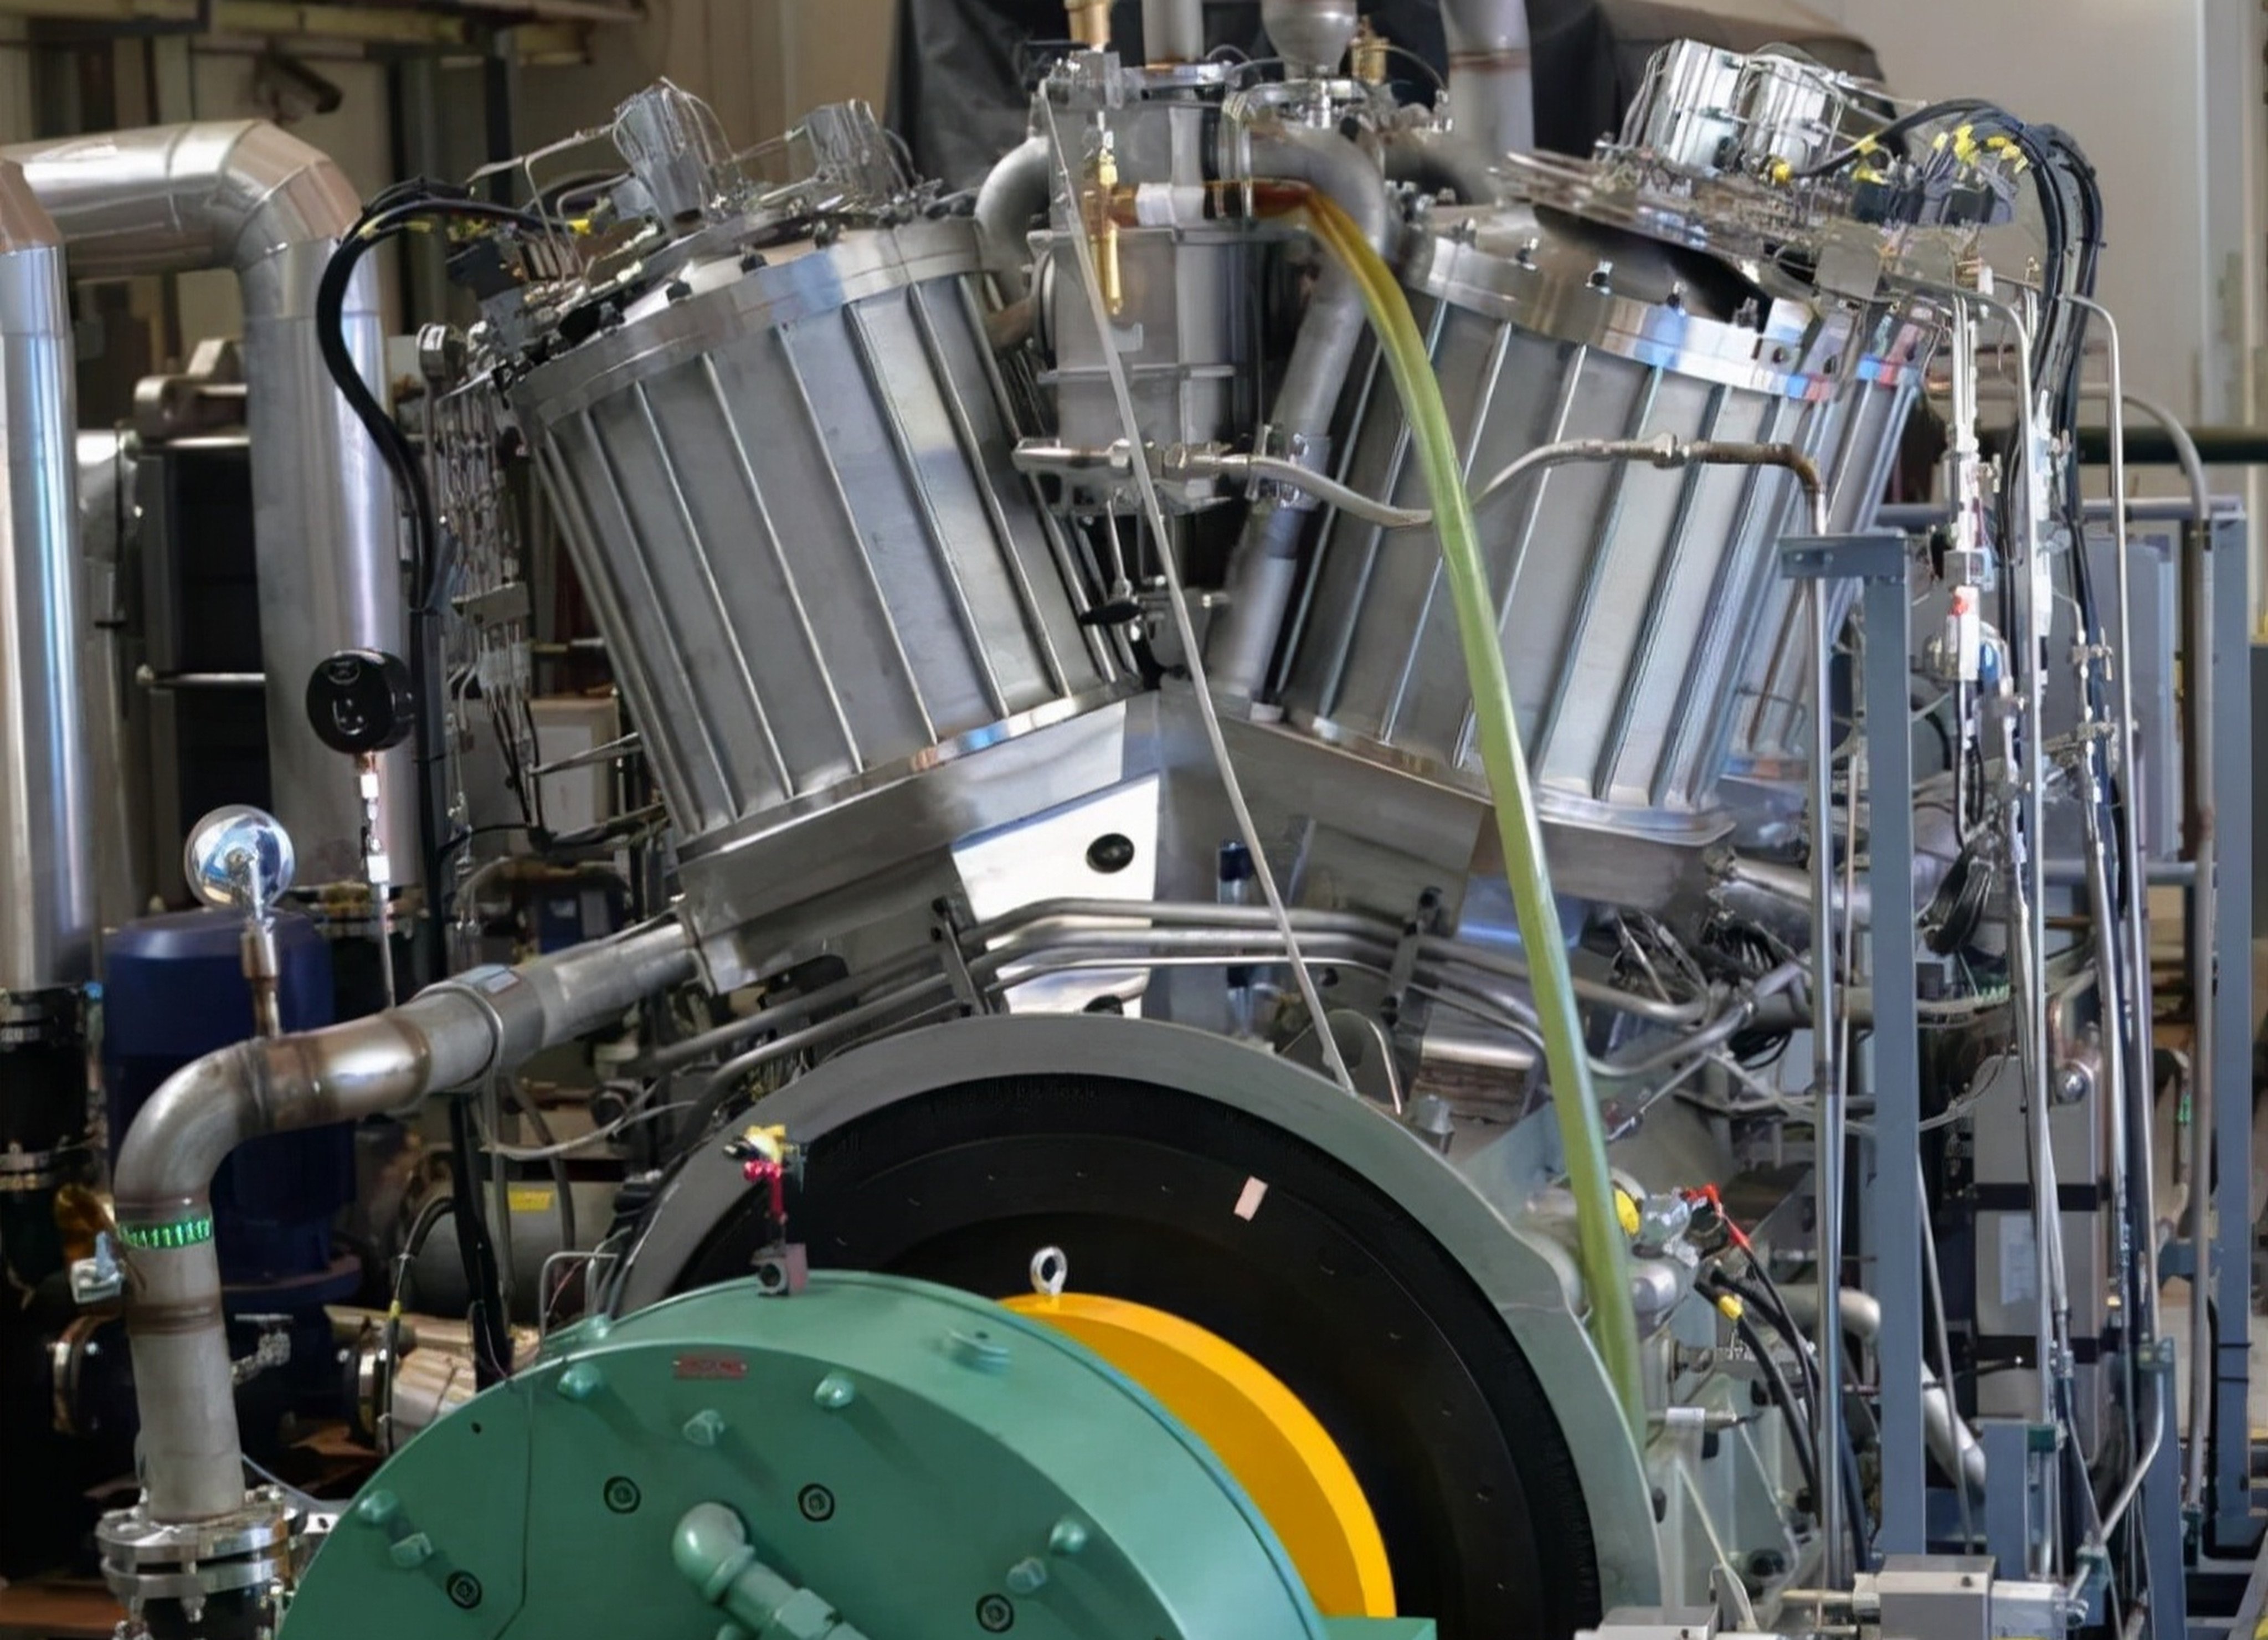 Stirling engines, like the one pictured, are now being used by Chinese scientists for high-power microwave (HPM) weapons in a world first. Photo: CSSC